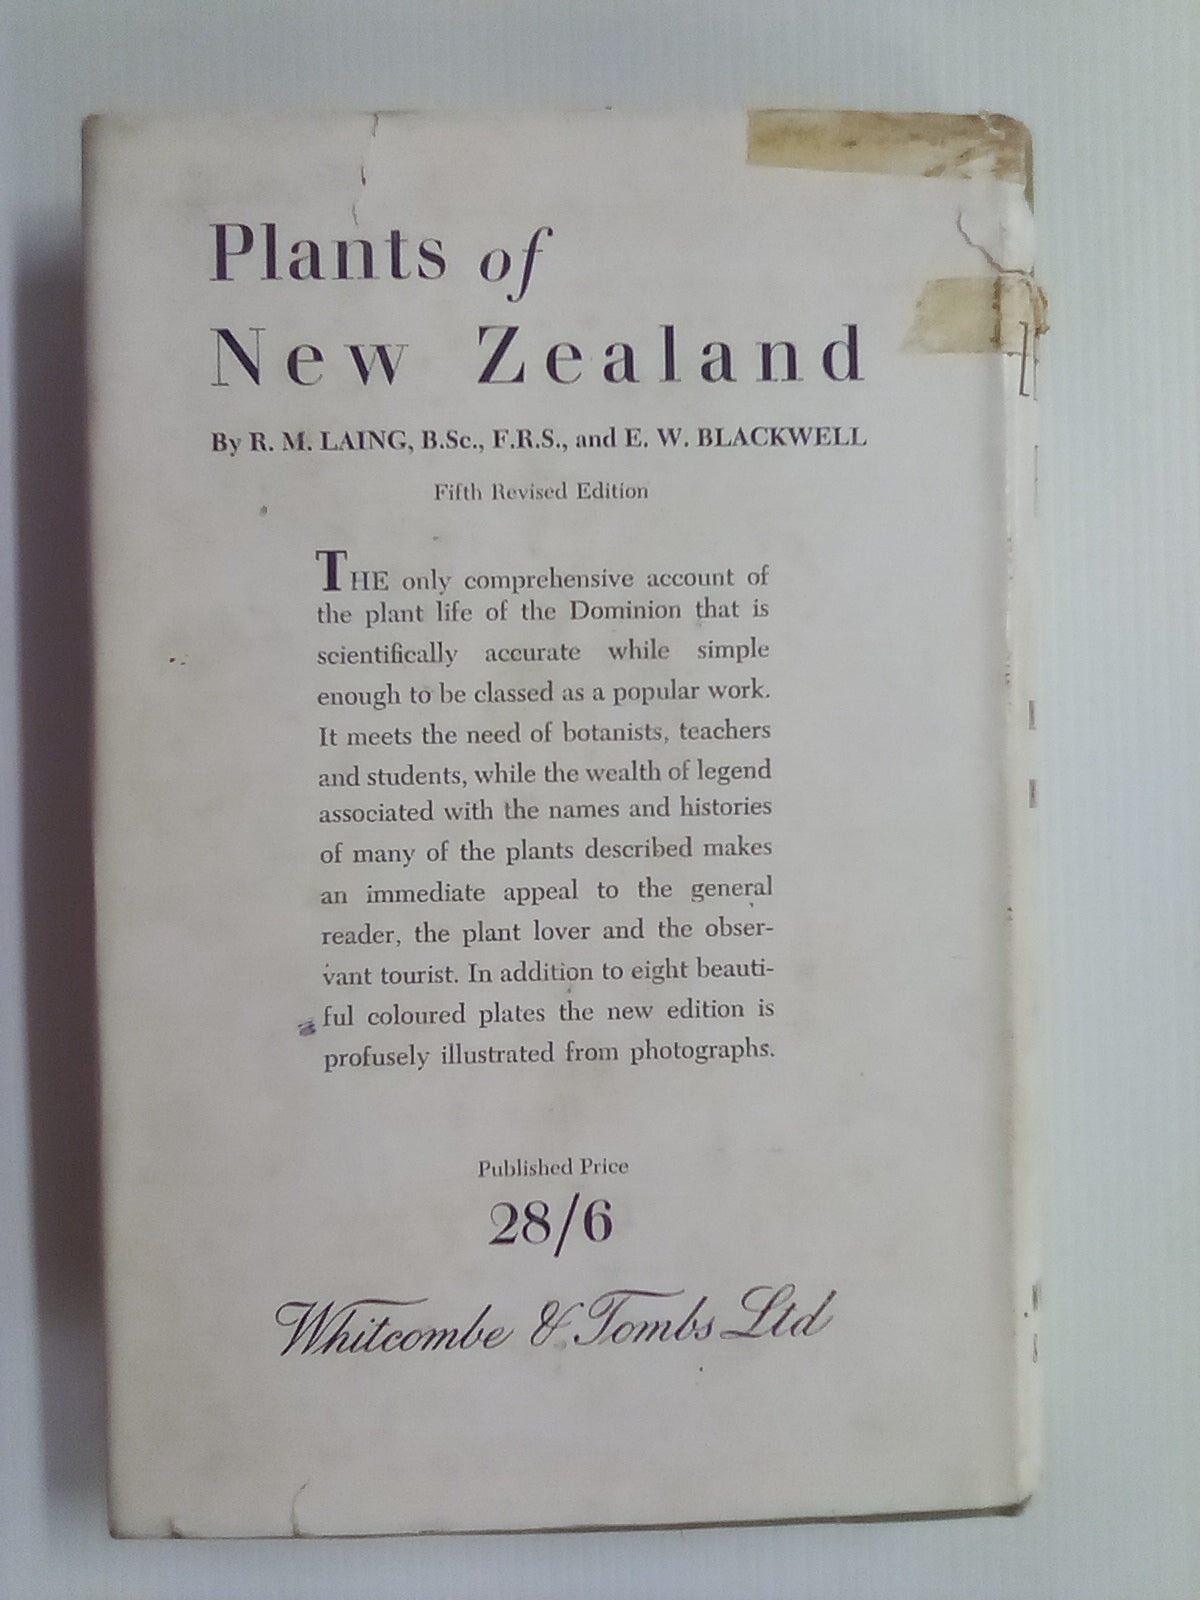 New Zealand Ferns by H.B. Dobbie and M. Crookes (4th. edition 1951)